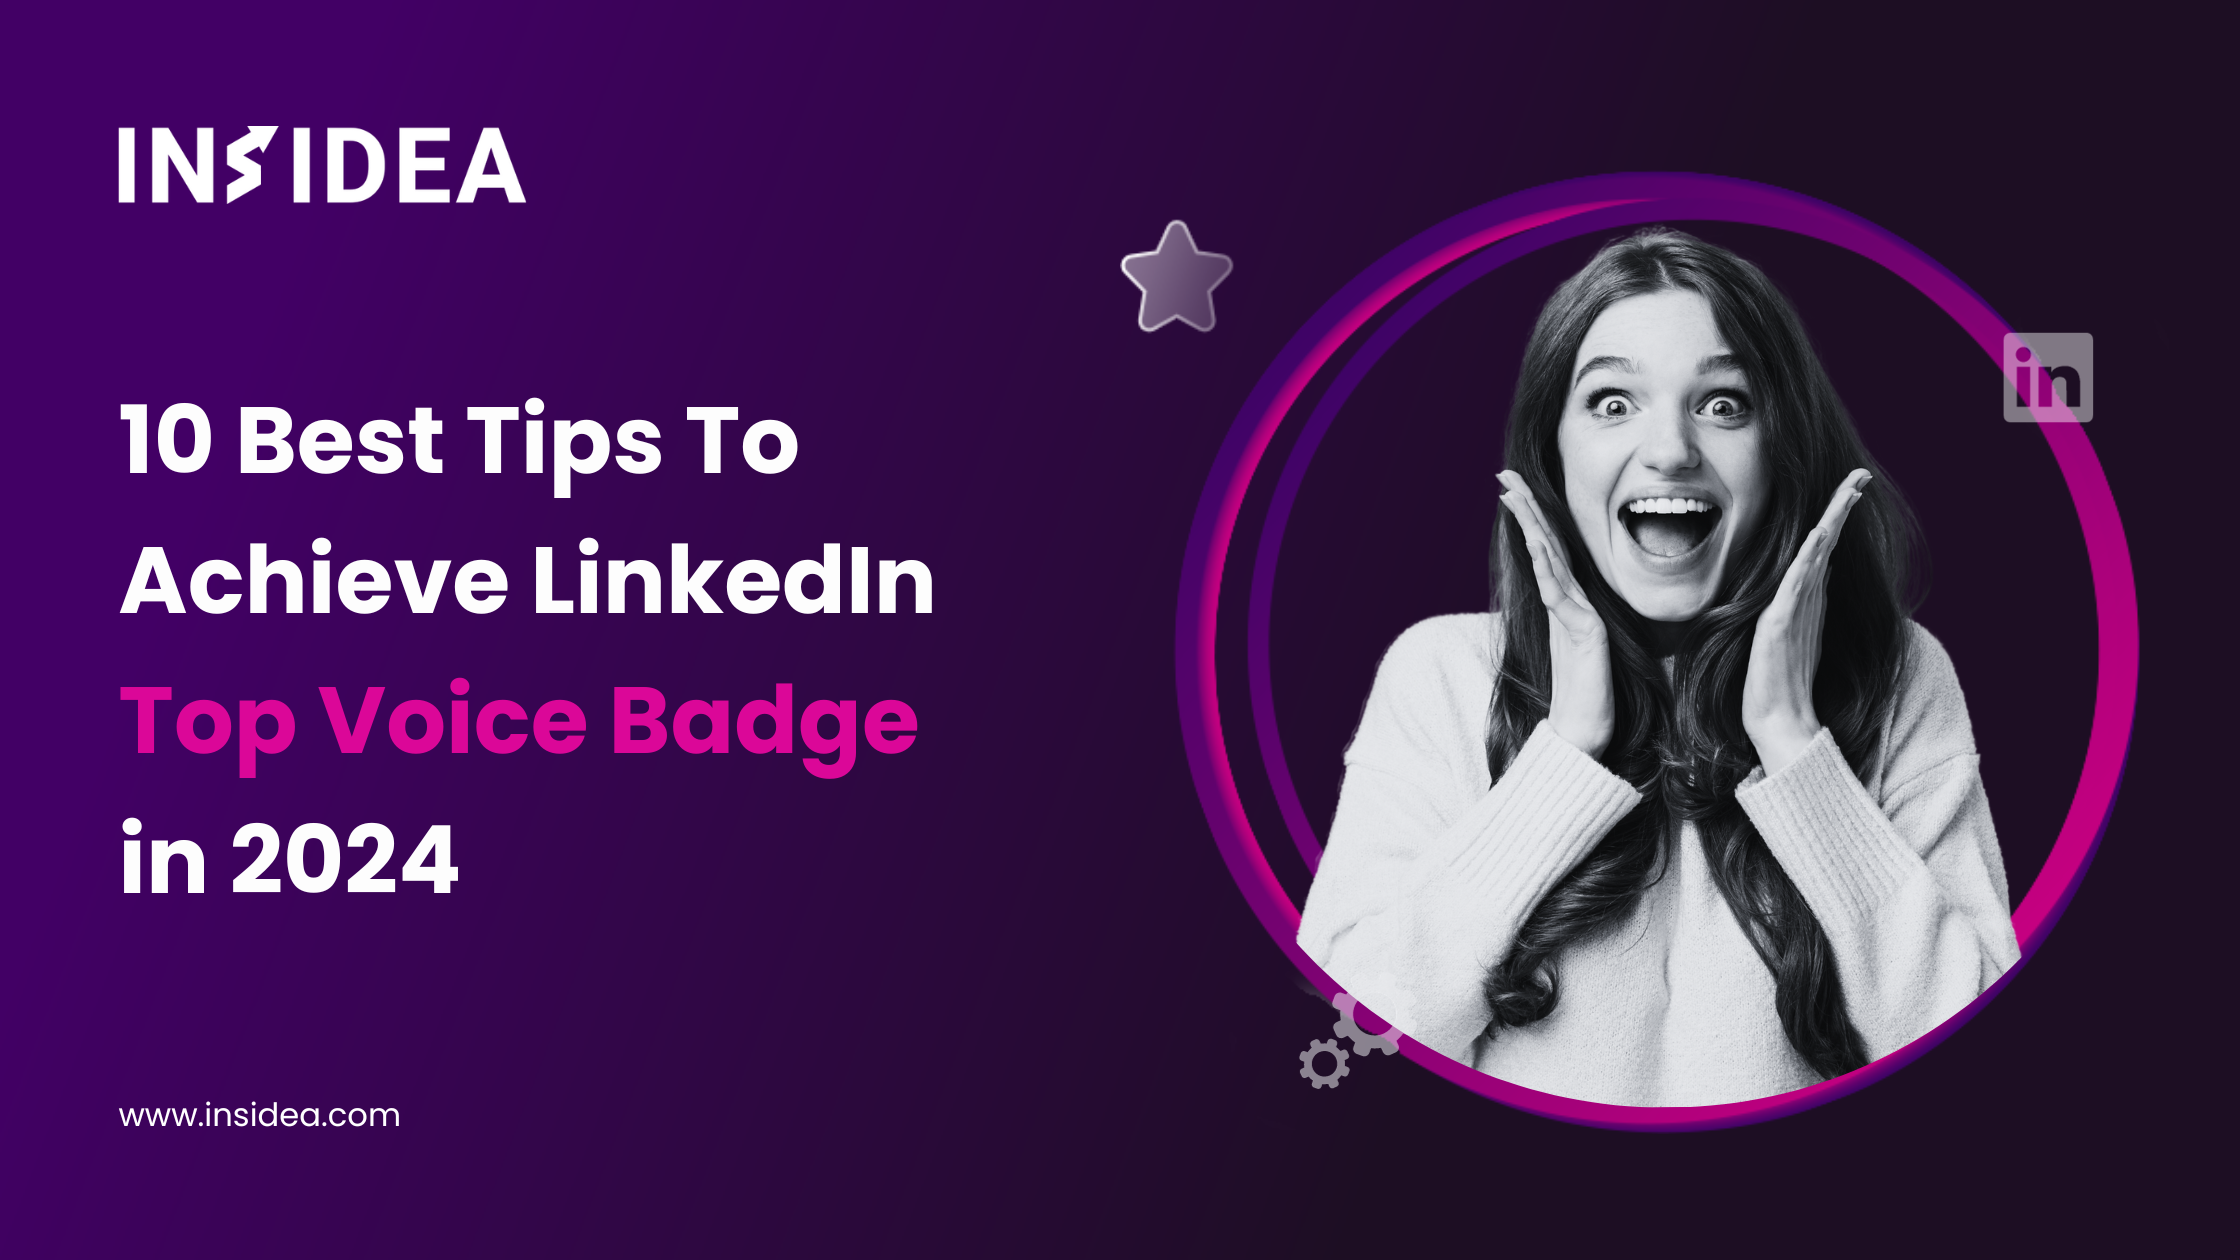 10 Best Tips To Achieve LinkedIn Top Voice Badge in 2024